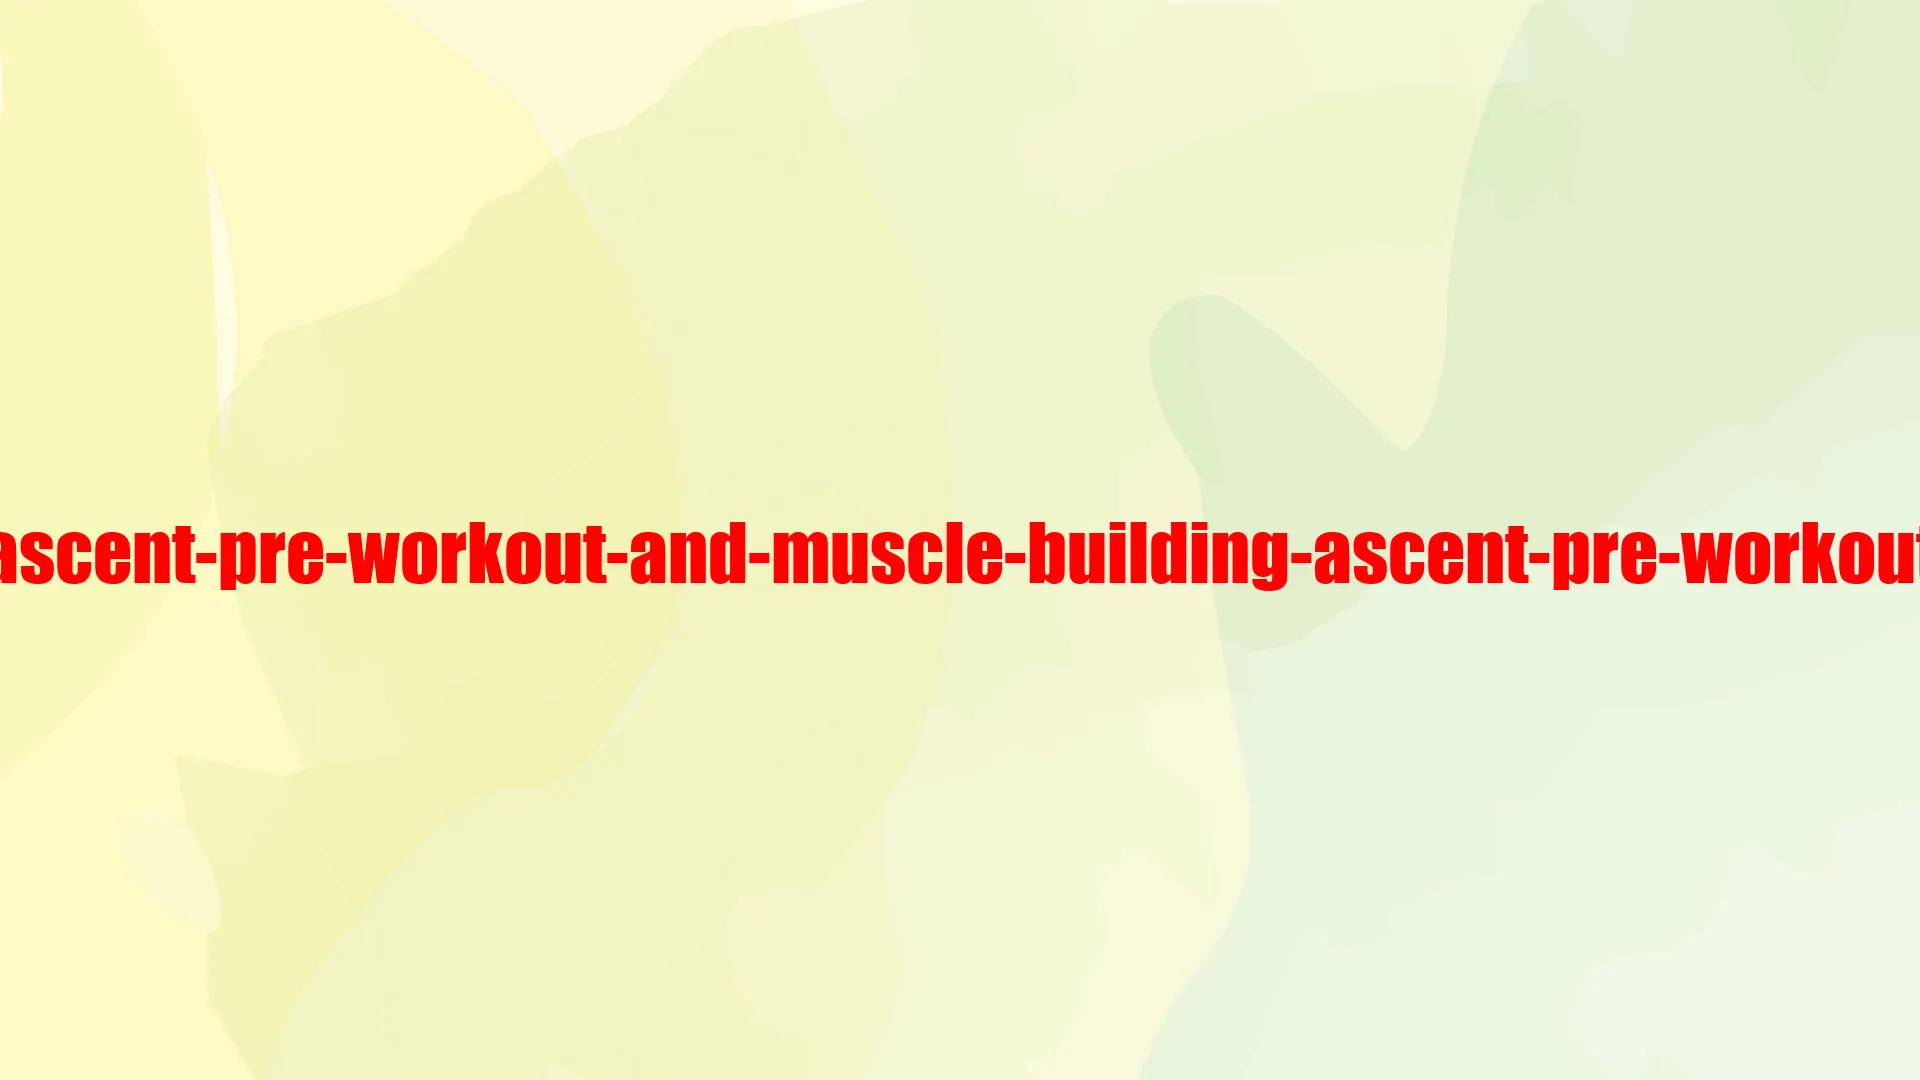 Ascent Pre-Workout and Muscle Building